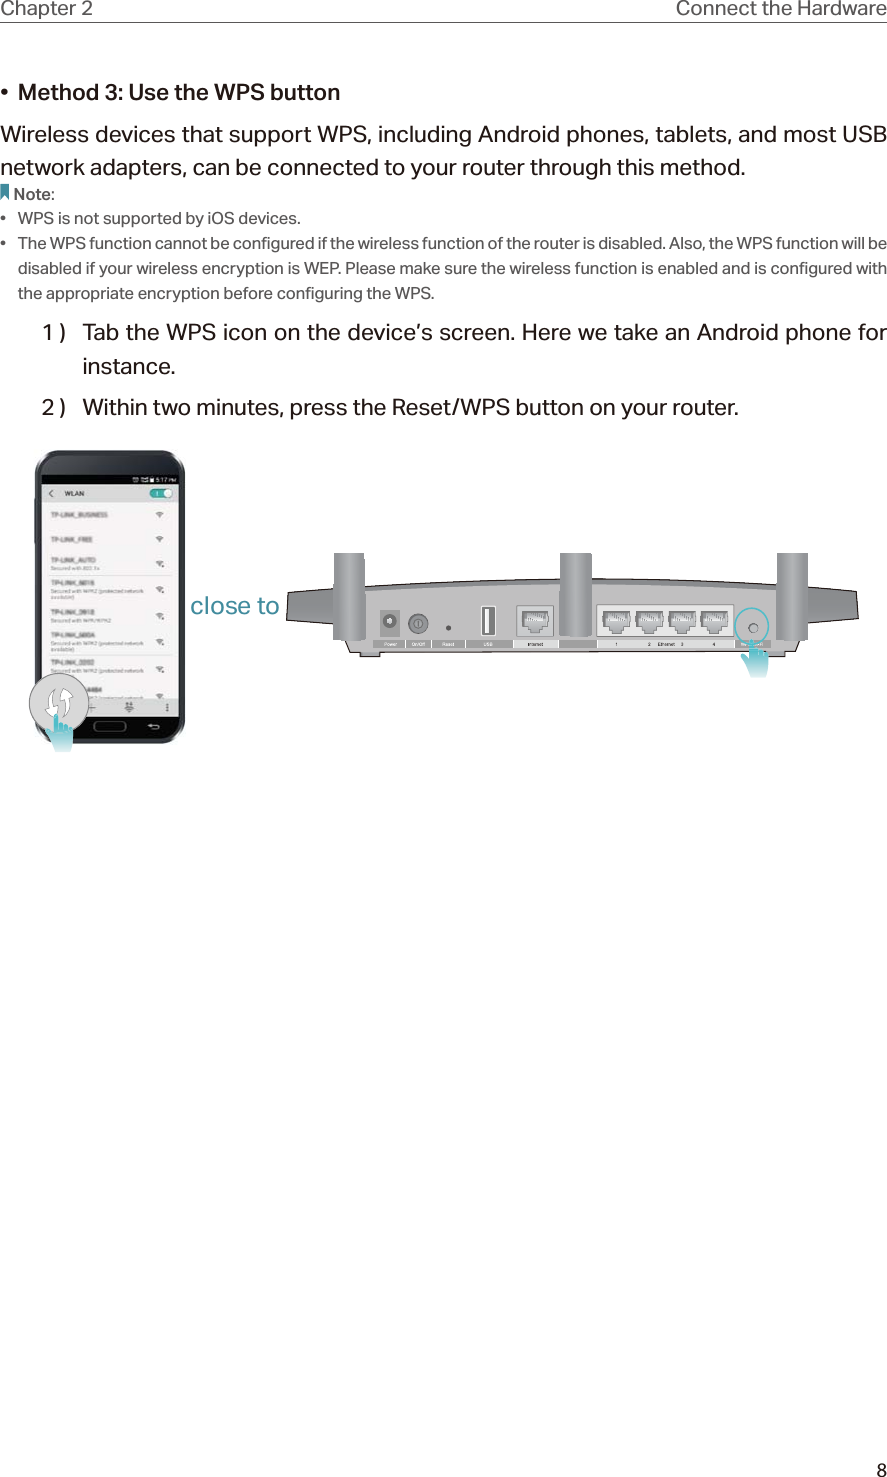 8Chapter 2 Connect the Hardware•  Method 3: Use the WPS buttonWireless devices that support WPS, including Android phones, tablets, and most USB network adapters, can be connected to your router through this method.Note:•  WPS is not supported by iOS devices.•  The WPS function cannot be configured if the wireless function of the router is disabled. Also, the WPS function will be disabled if your wireless encryption is WEP. Please make sure the wireless function is enabled and is configured with the appropriate encryption before configuring the WPS.1 )  Tab the WPS icon on the device’s screen. Here we take an Android phone for instance.2 )  Within two minutes, press the Reset/WPS button on your router. close to